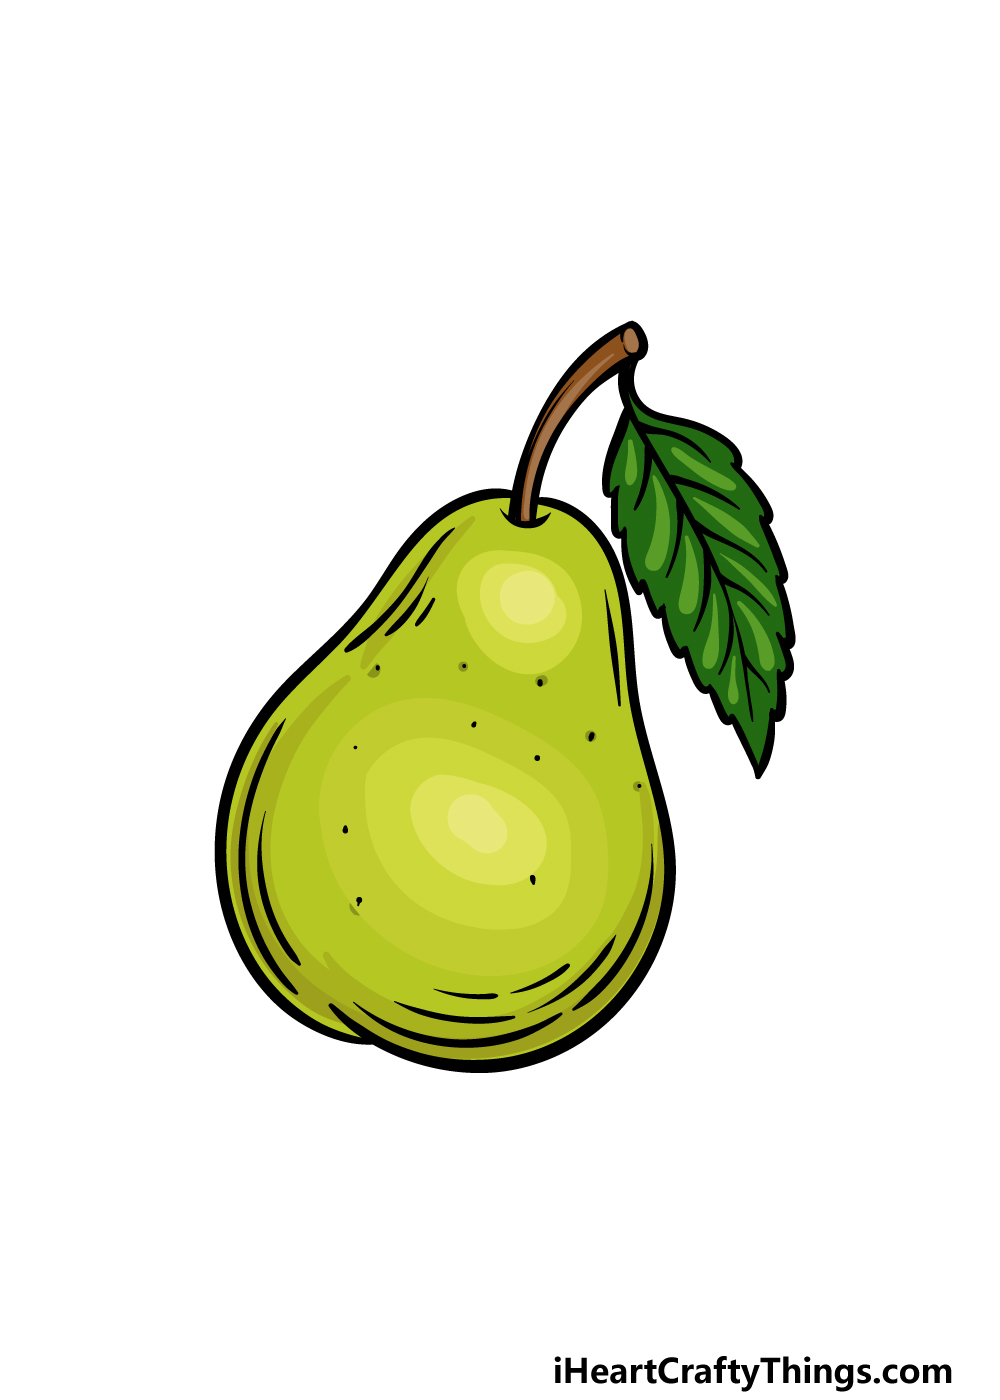 How to Draw A Pear step 6